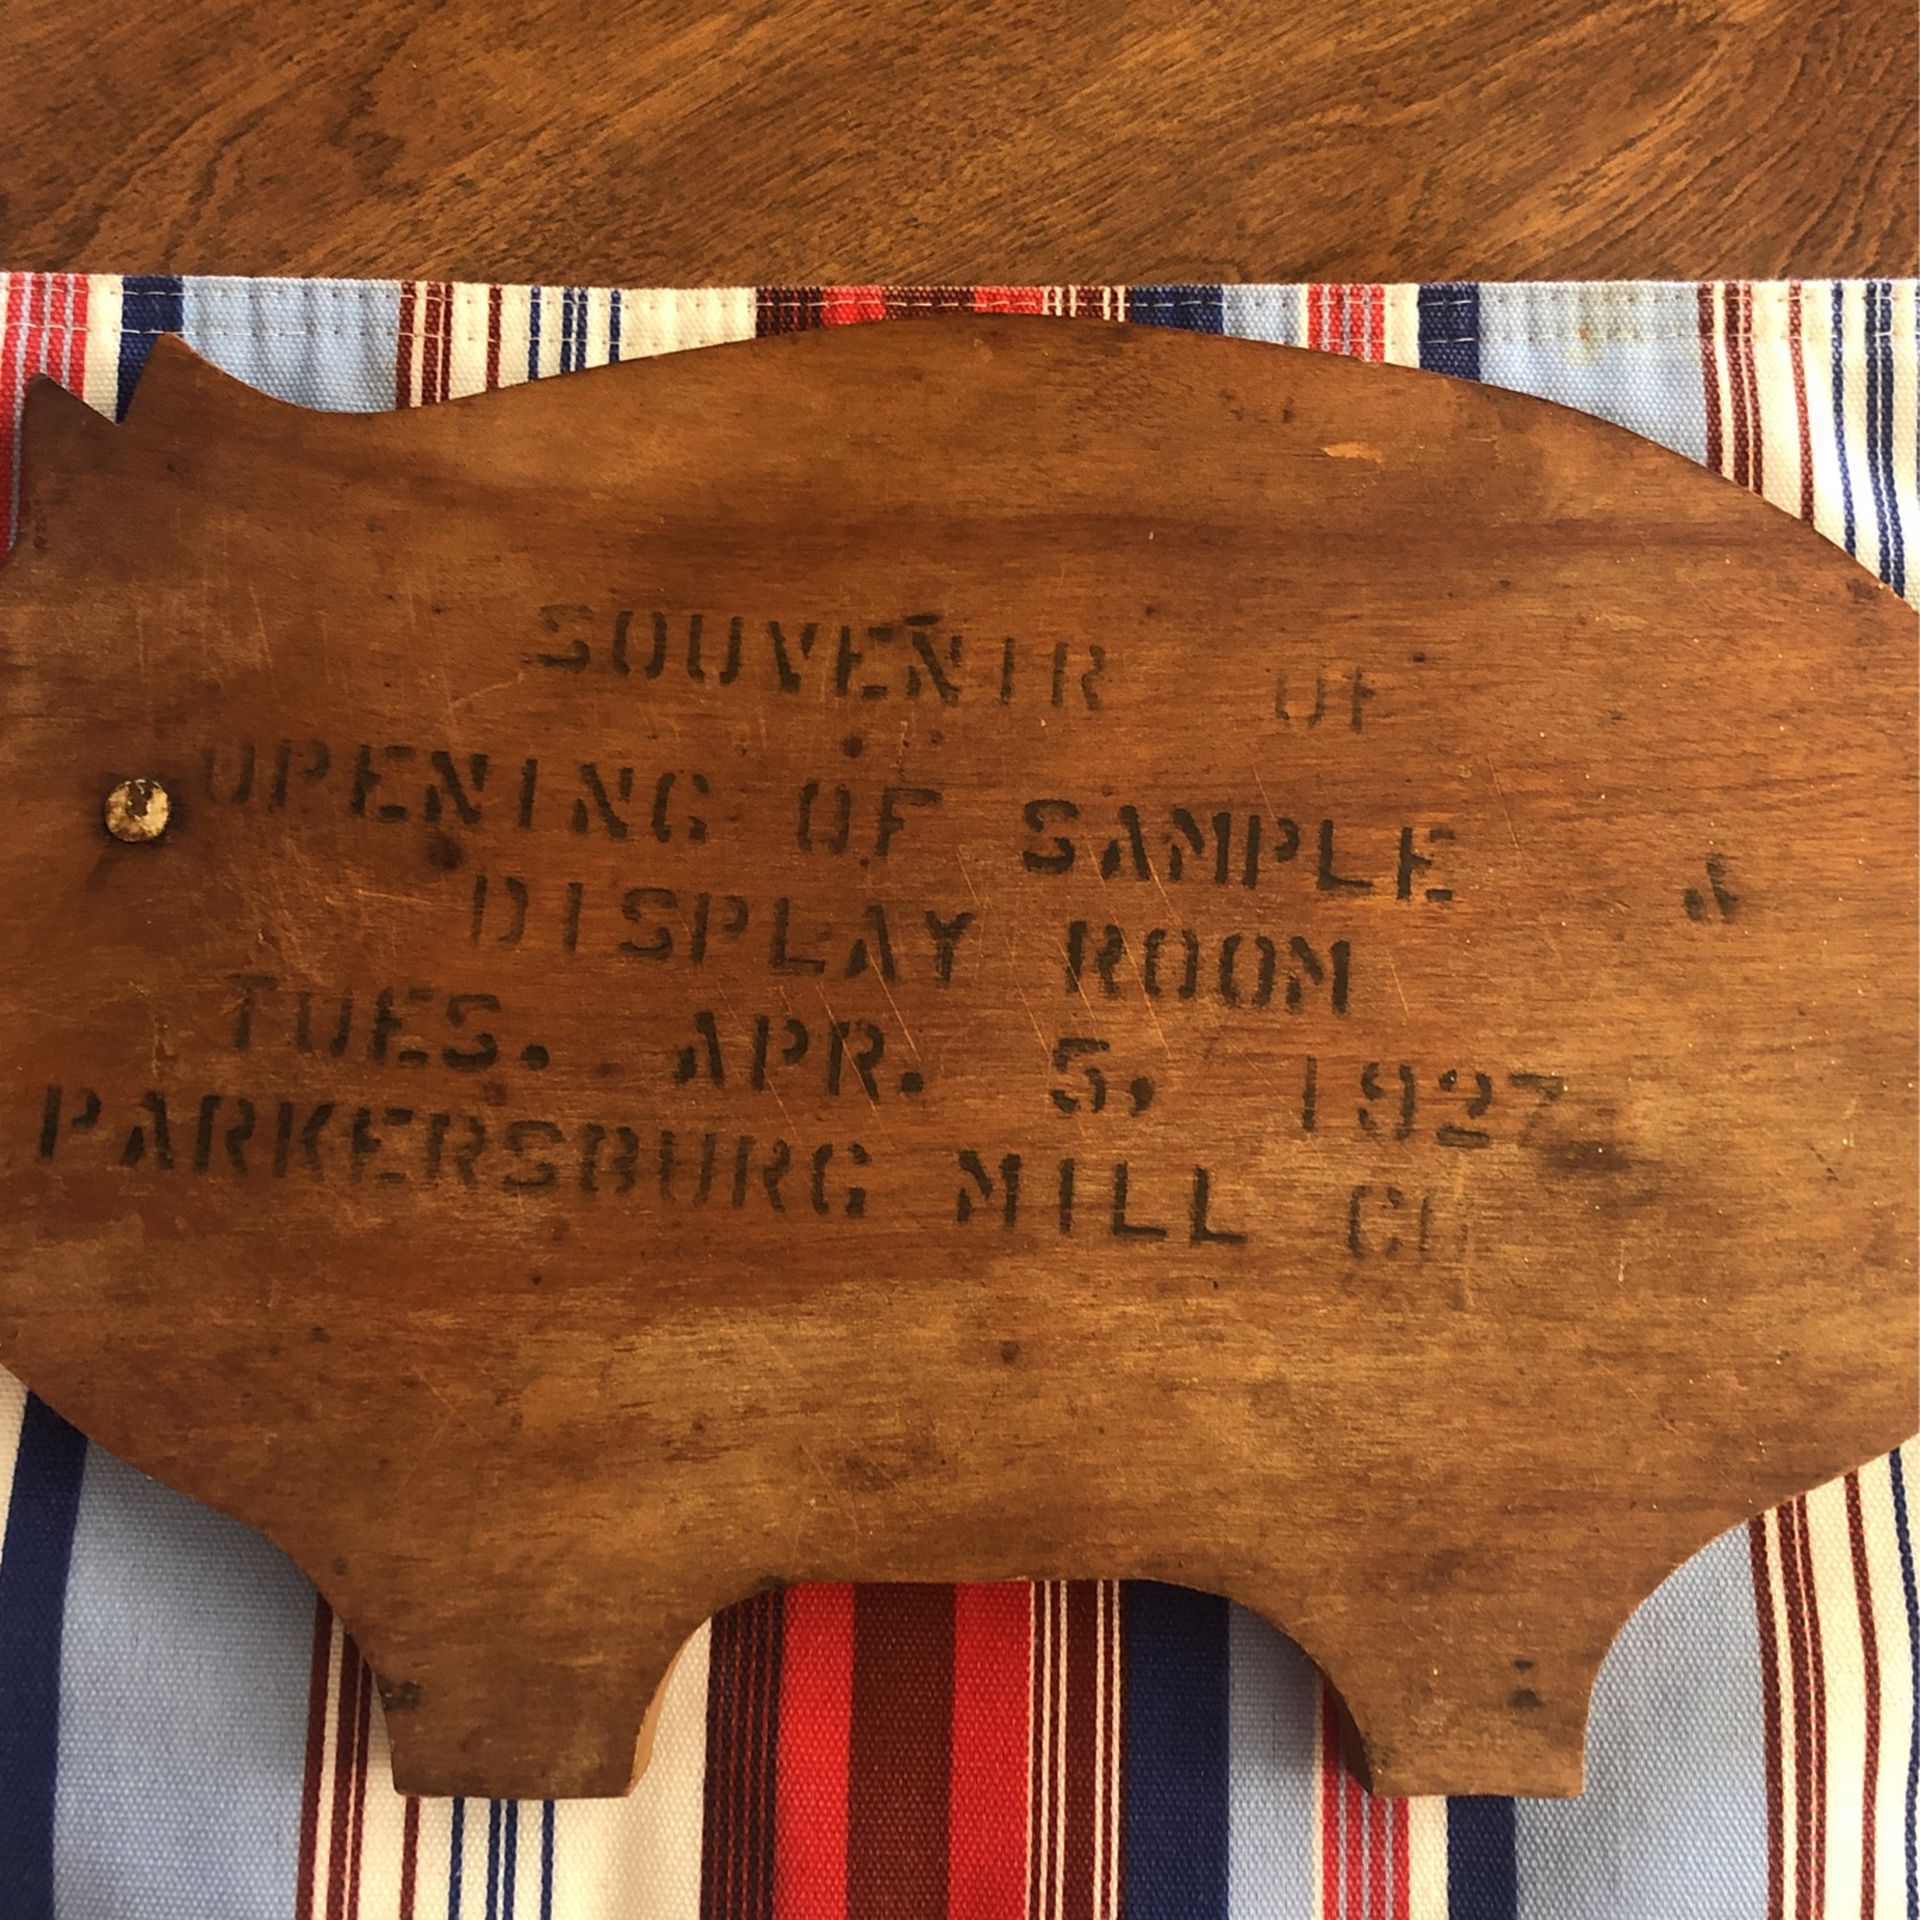 1927  Wood Pig /Parkersburg Mill Co $35